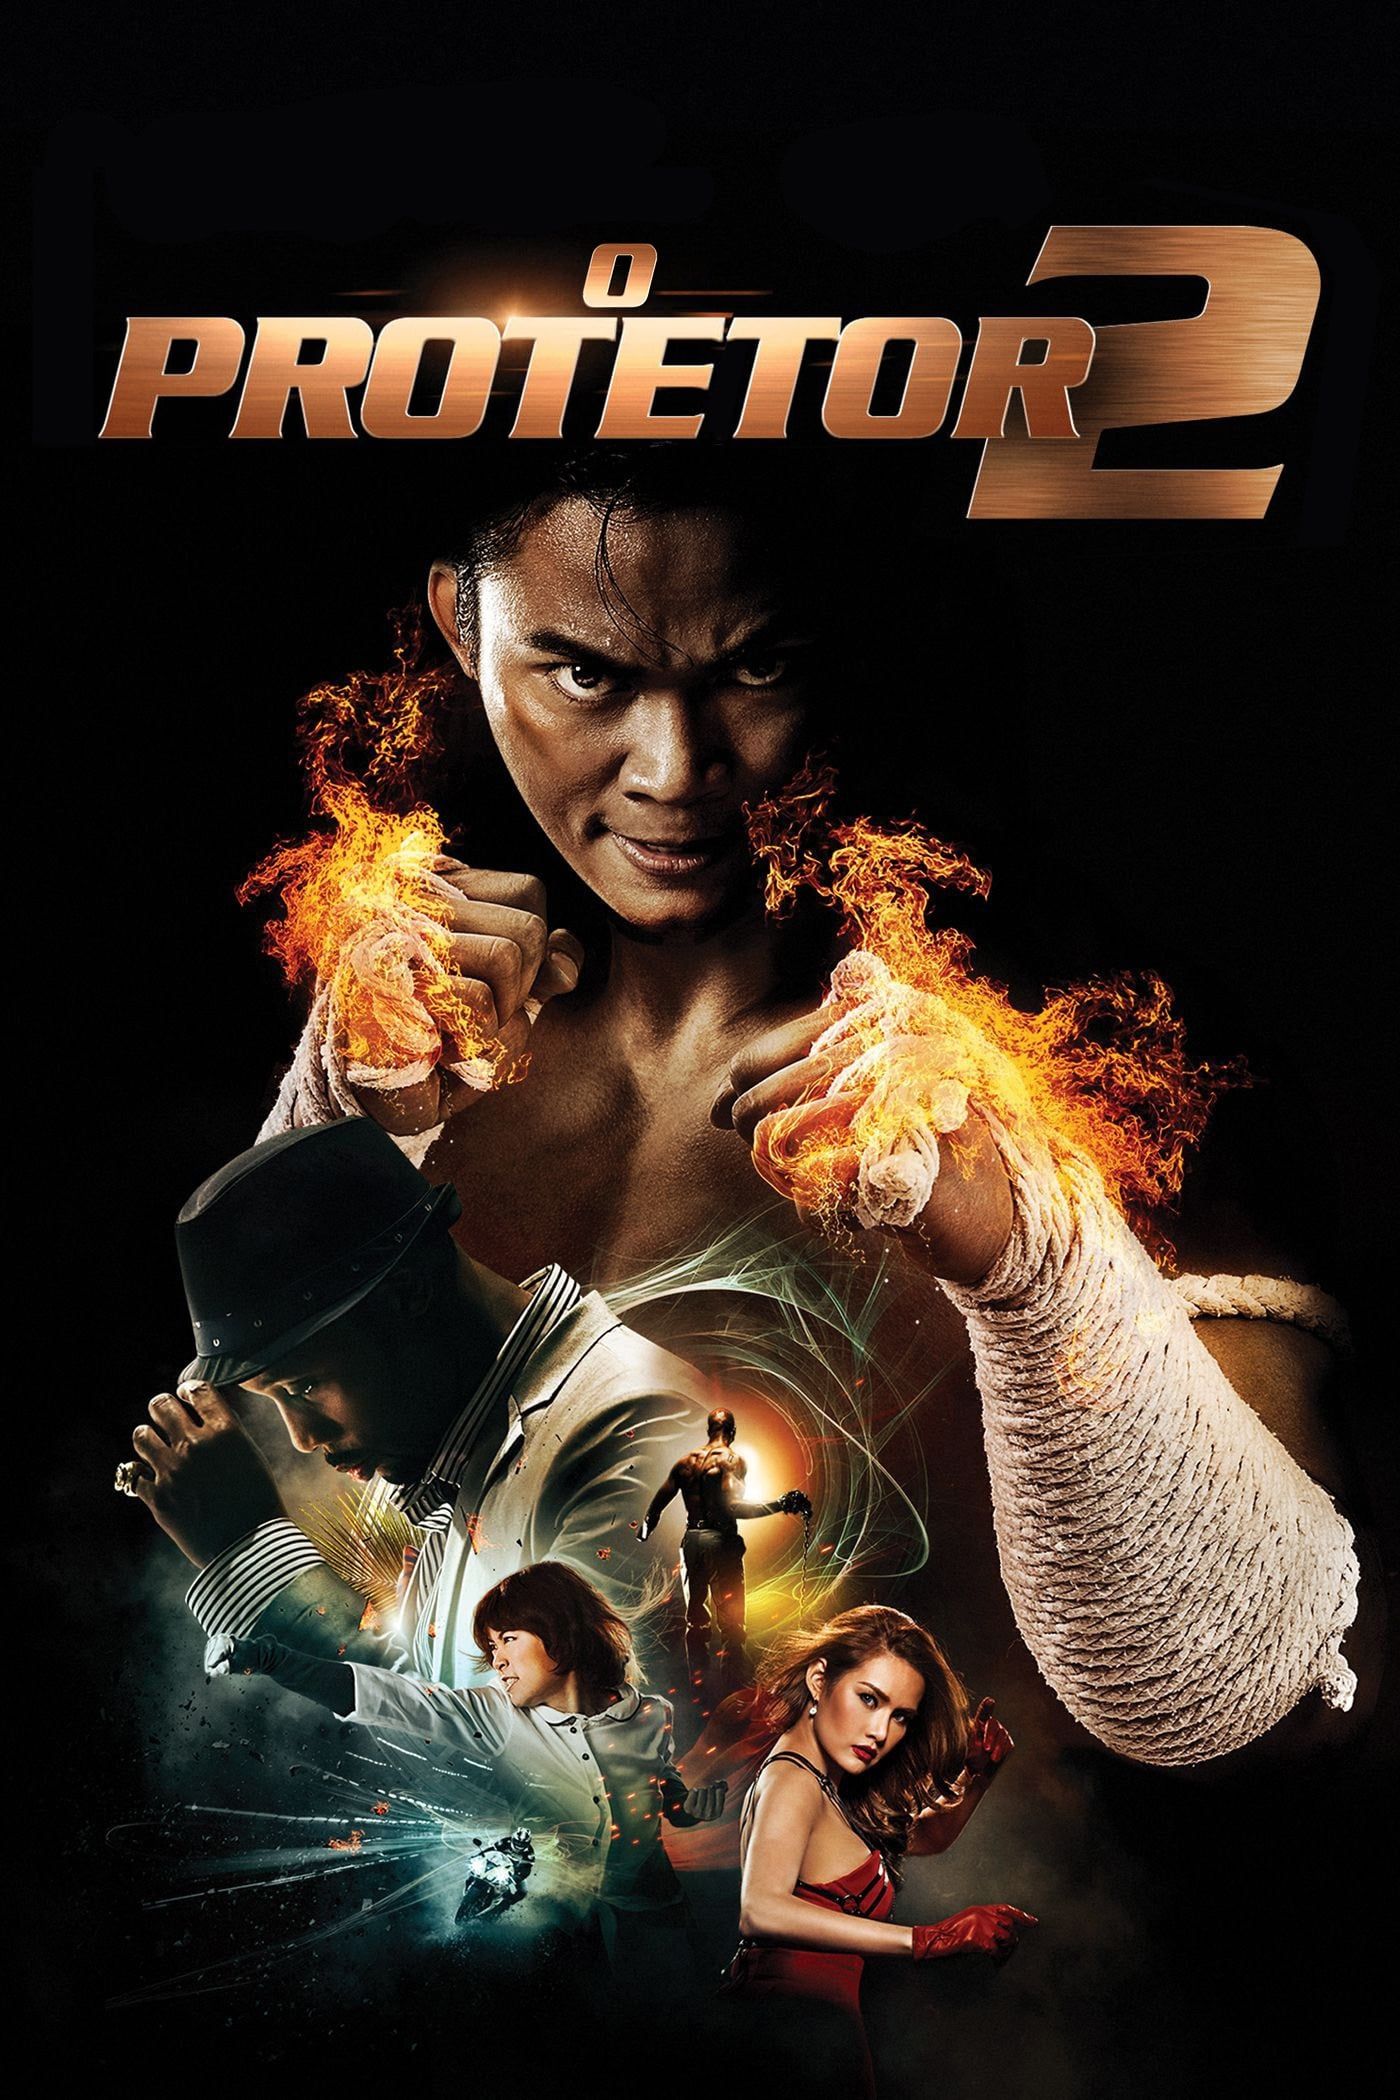 Watch The Protector 2 (Tamil Dubbed) Movie Online for Free Anytime